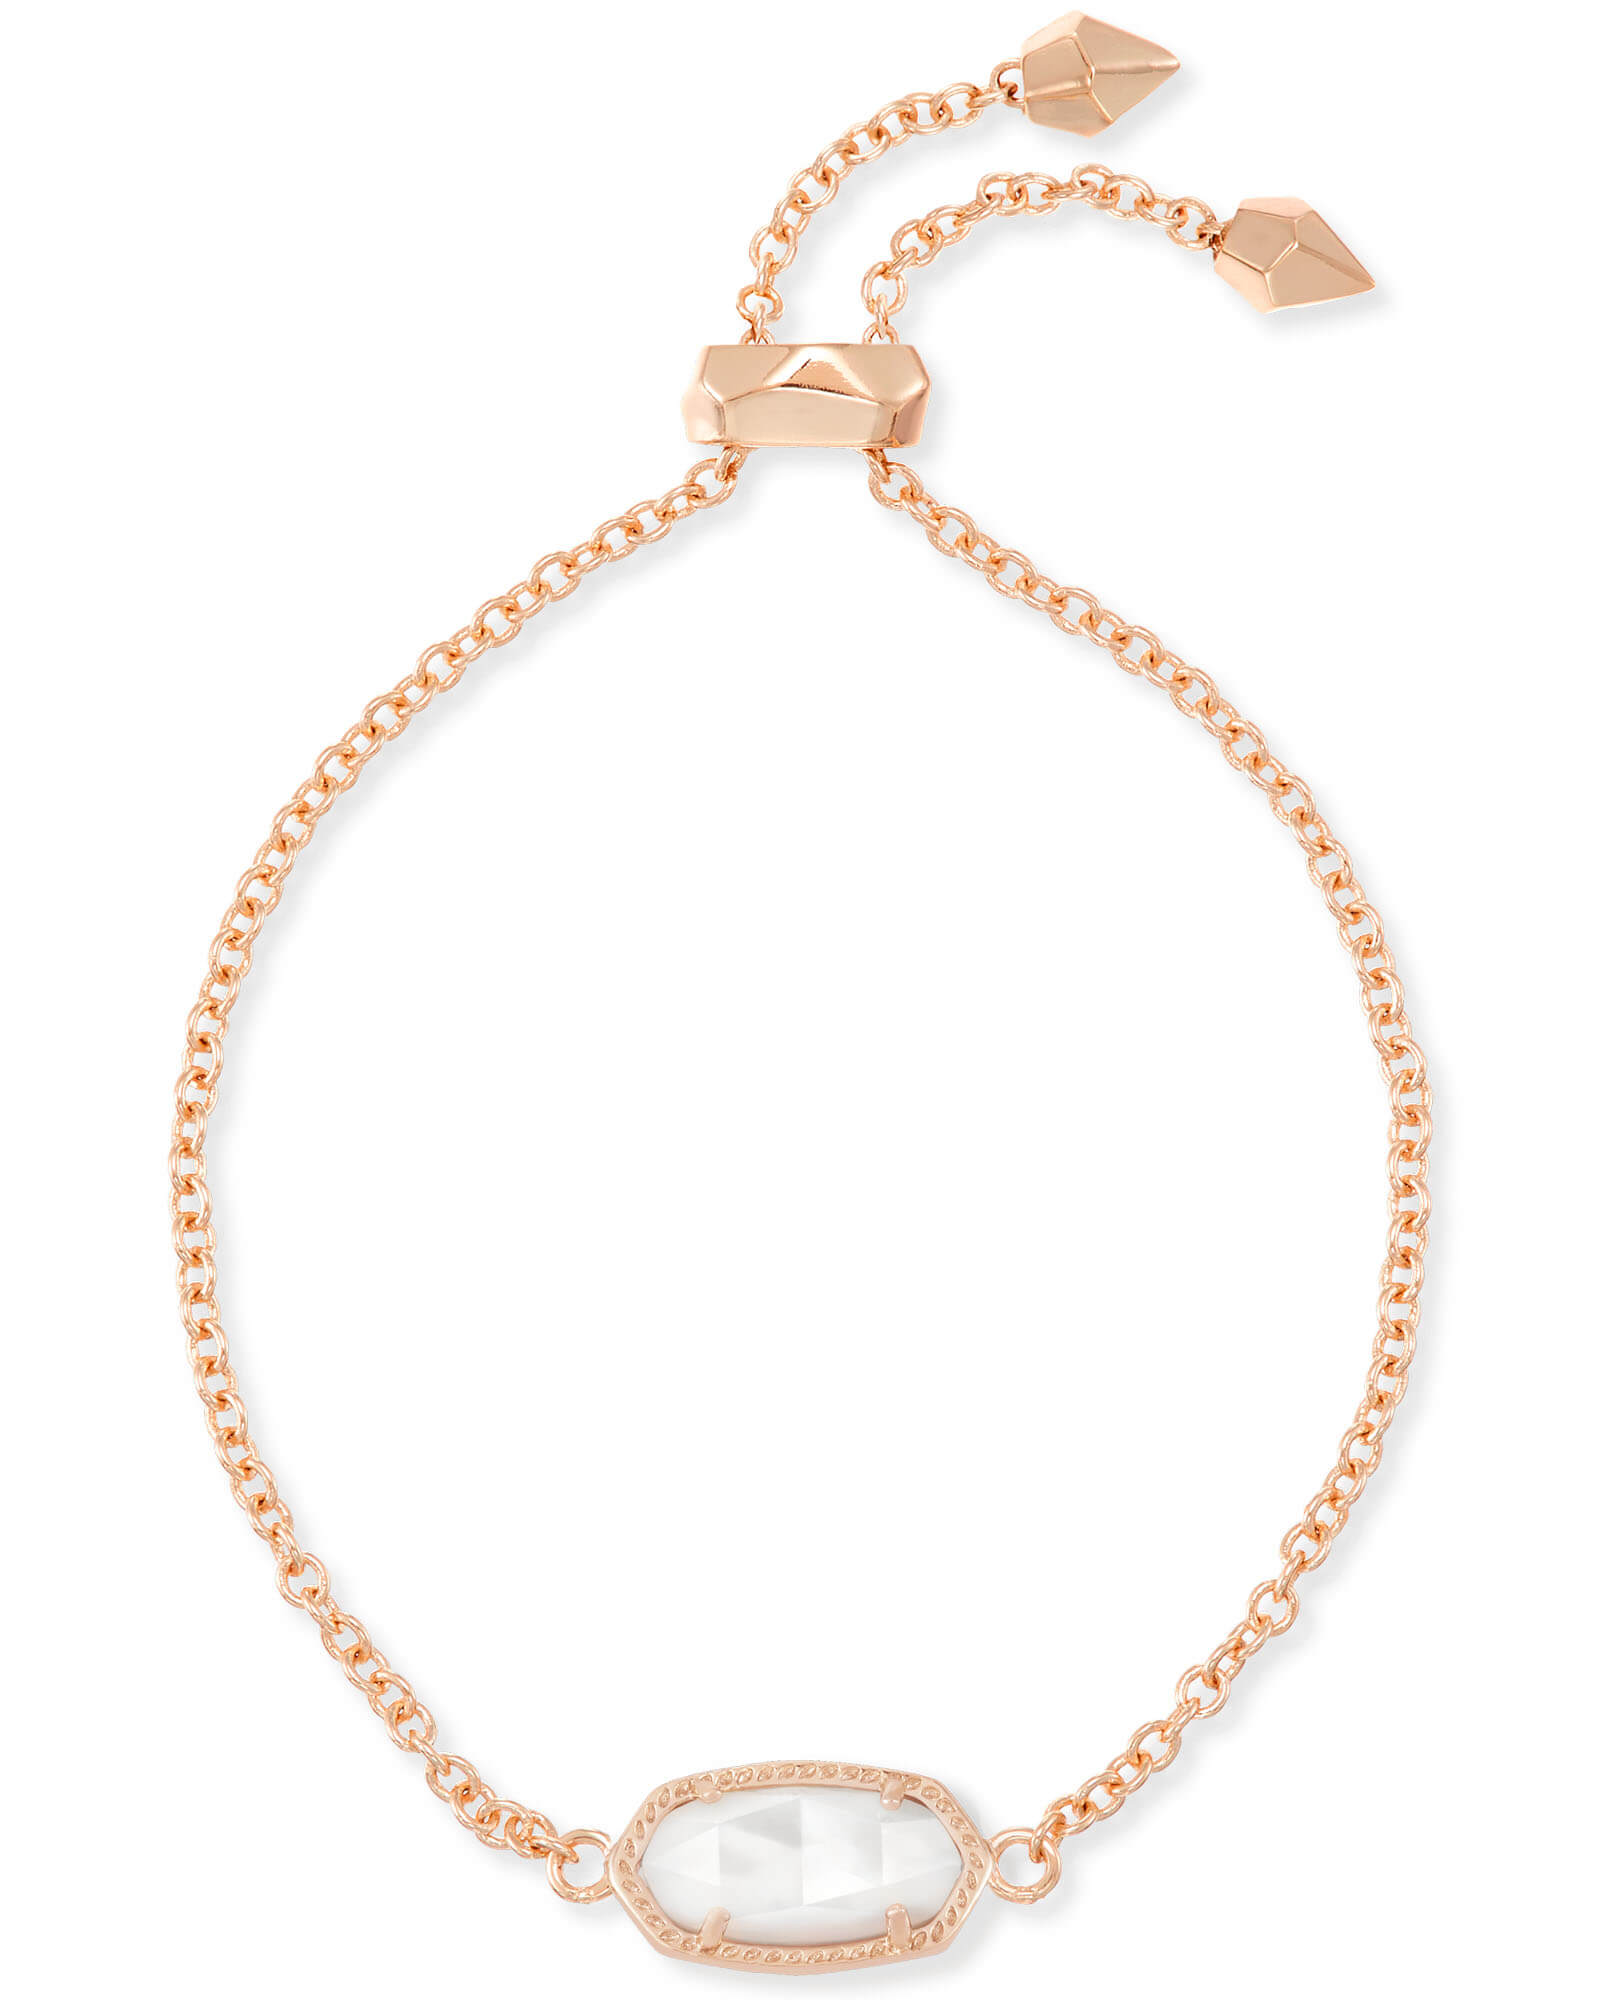 Kendra Scott Elaina Rose Gold Adjustable Chain Bracelet in Ivory Pearl | Mother Of Pearl